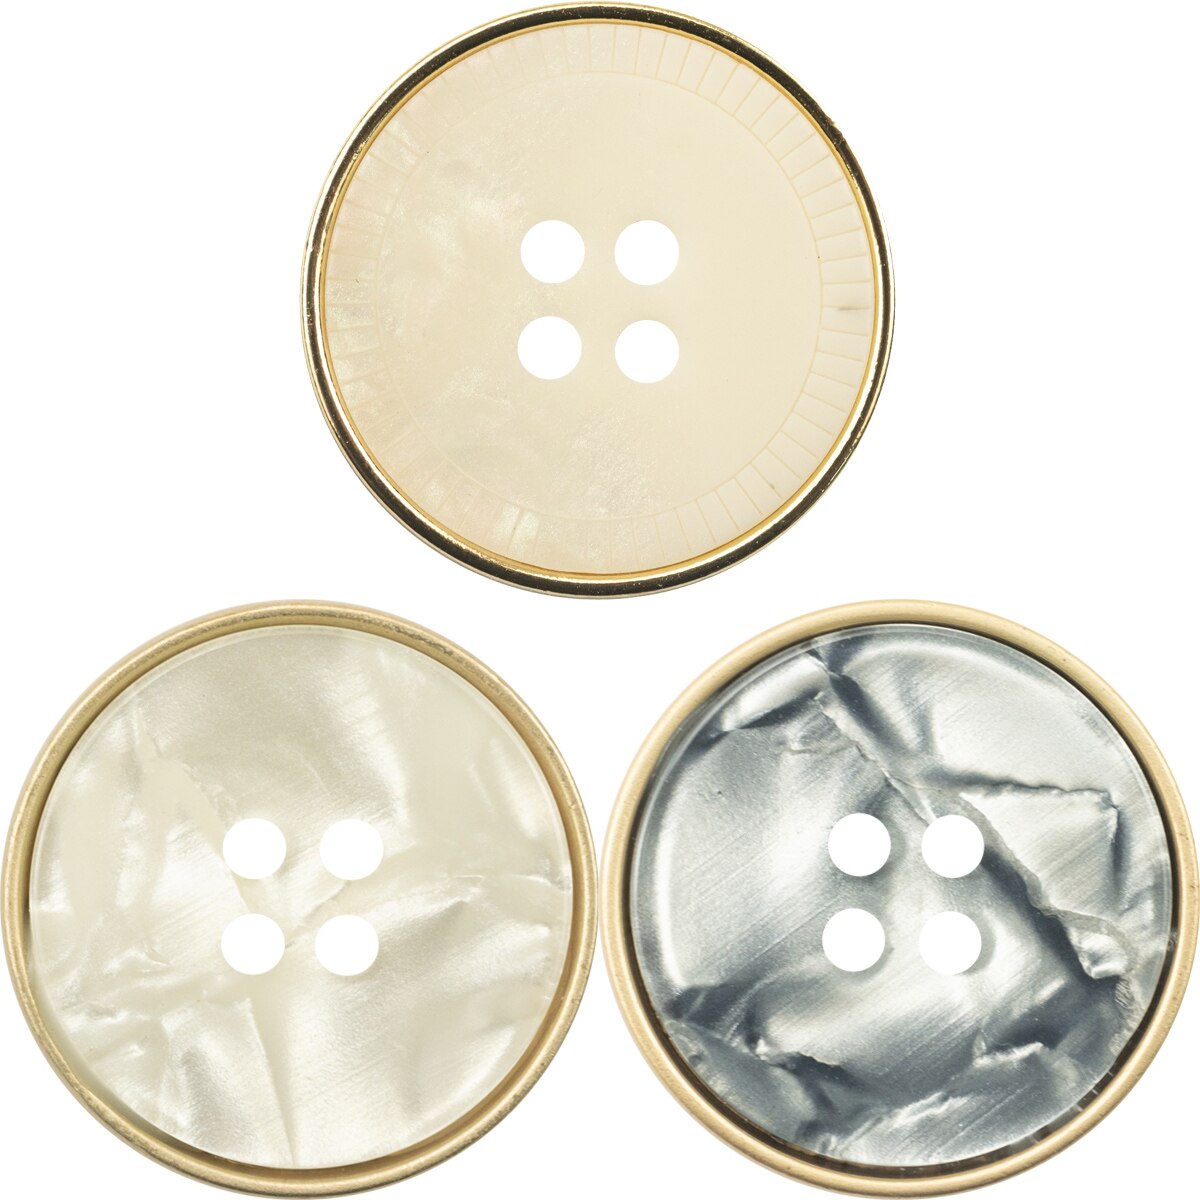 6pcs  New Designer Buttons Combination Metal Rim Shell Like Polyester Buttons